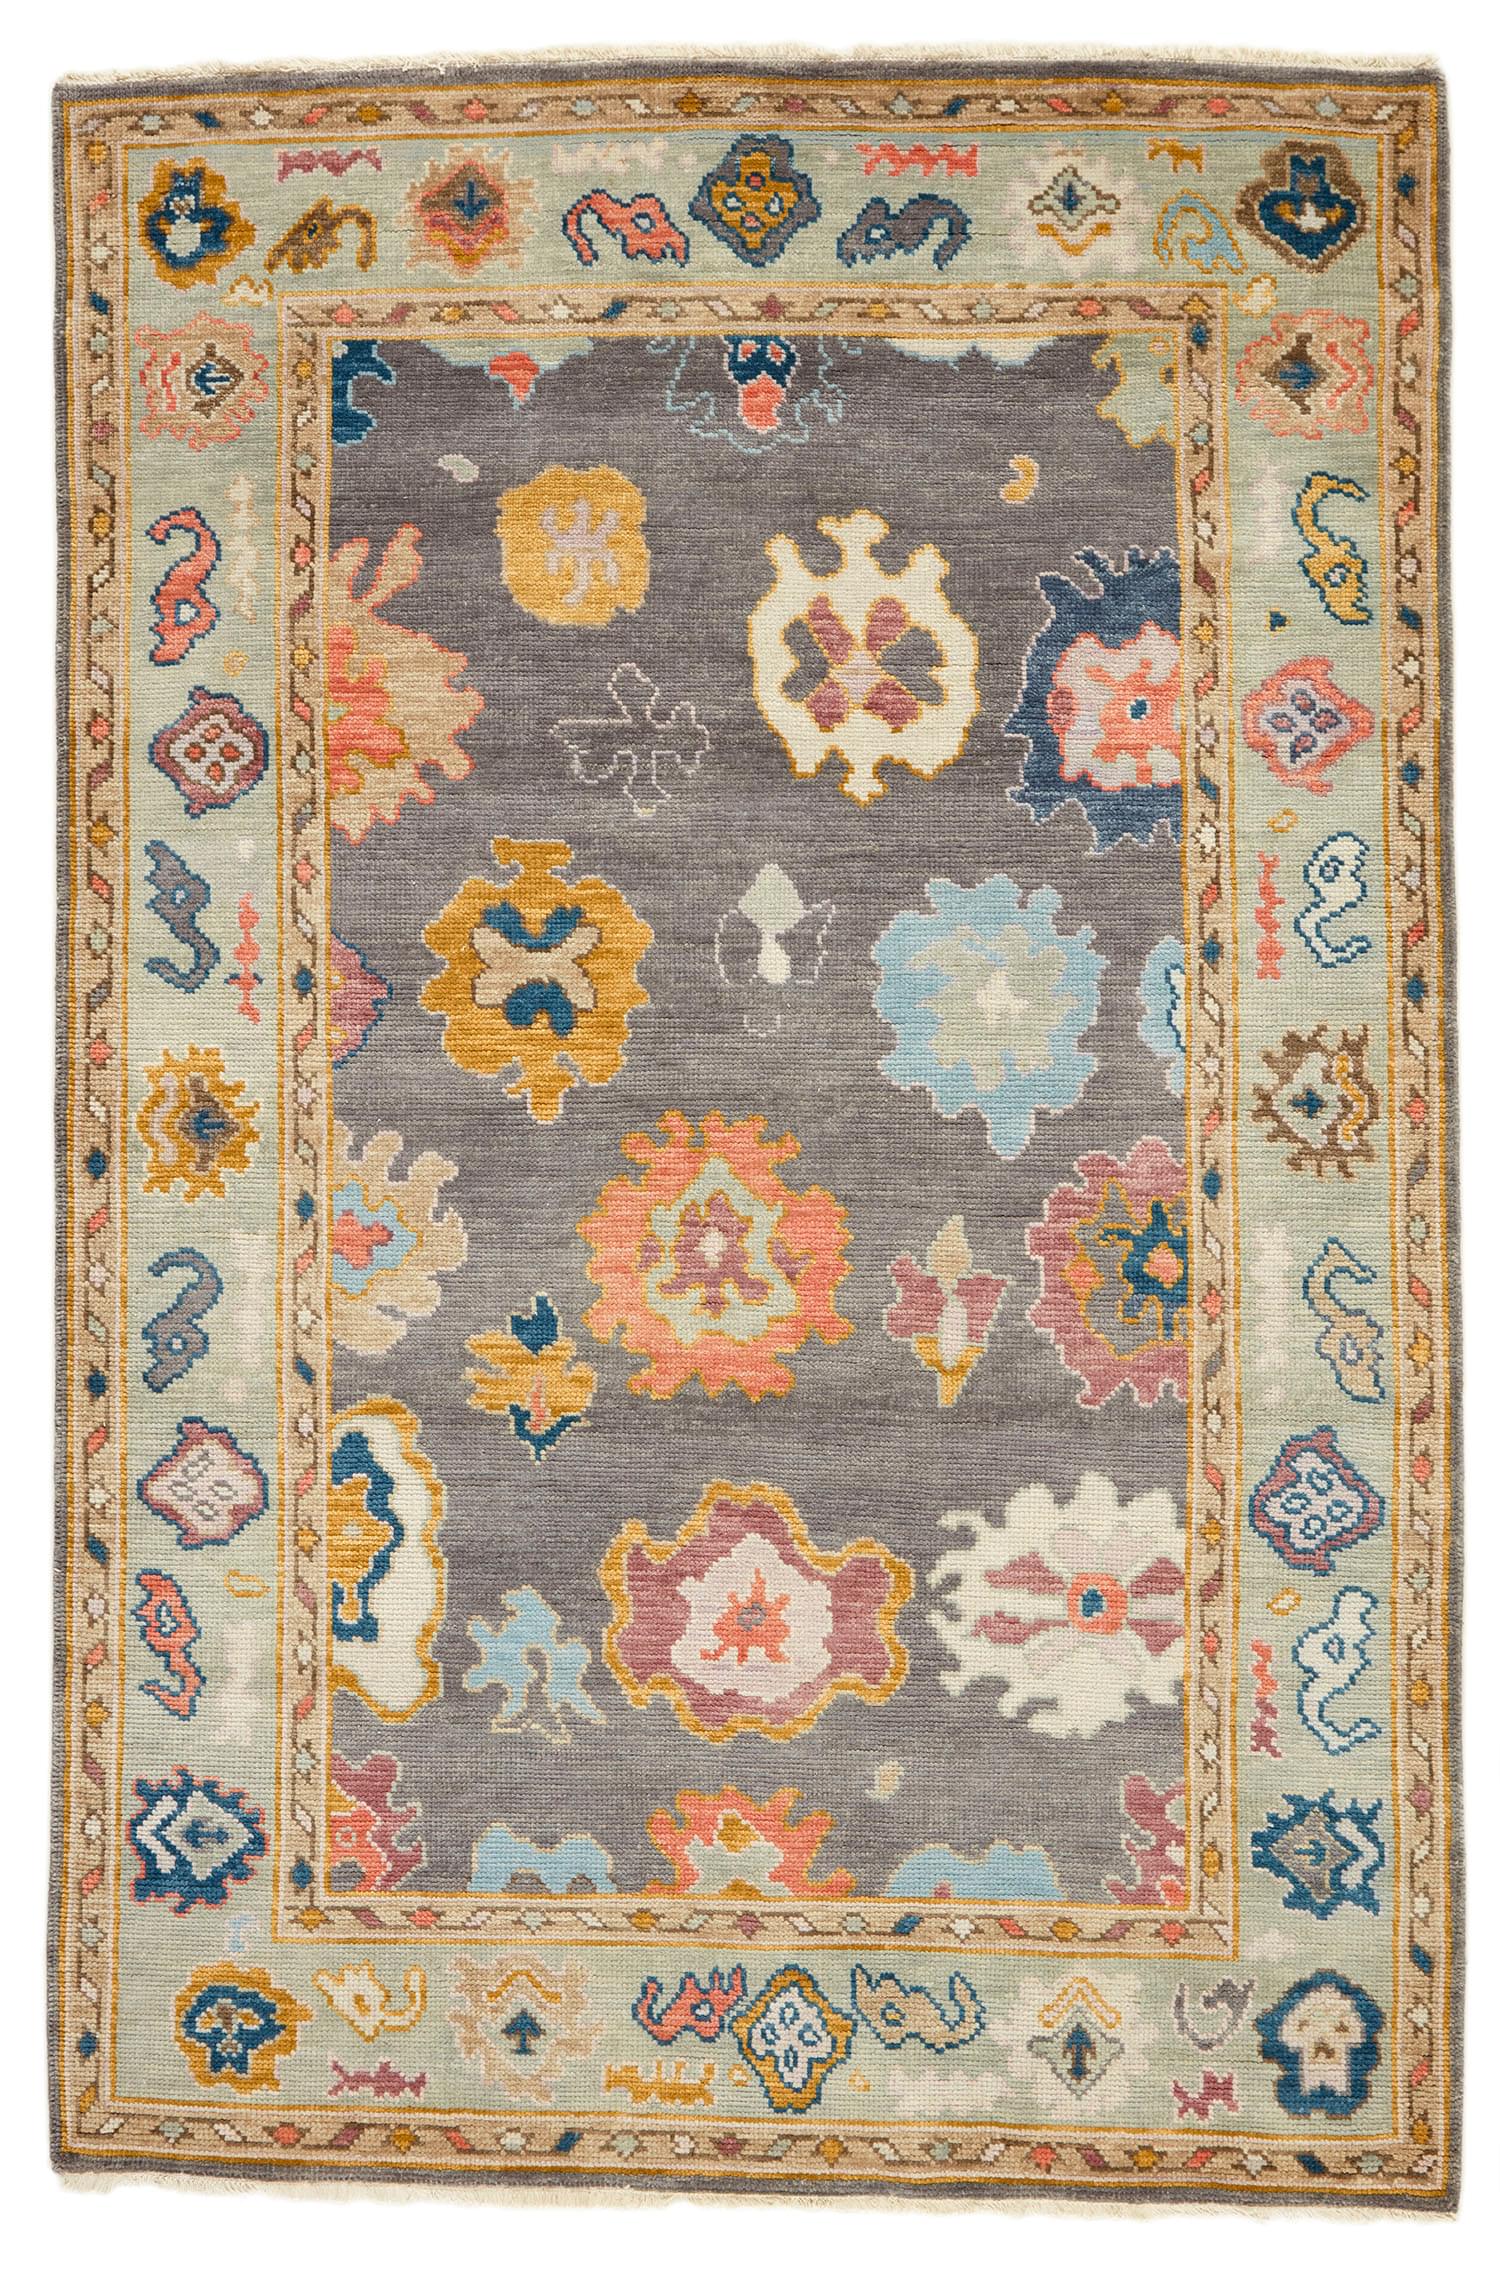 authentic Oriental rug with traditional motifs in red, pink, orange, yellow, blue, sky, green, beige, brown and grey